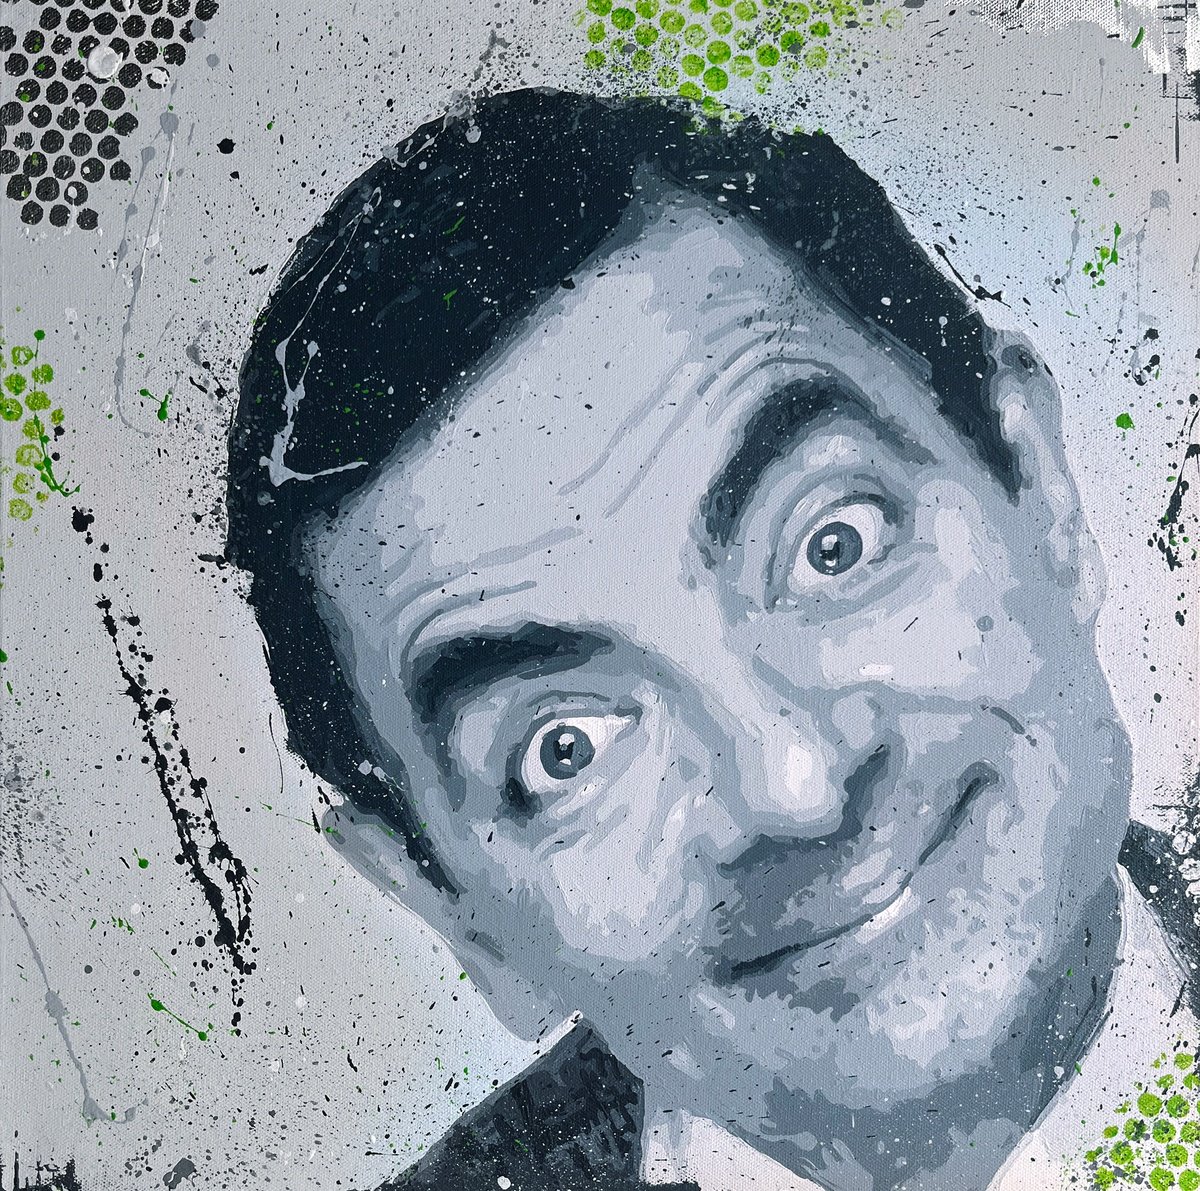 Mr Bean by Martin Rowsell